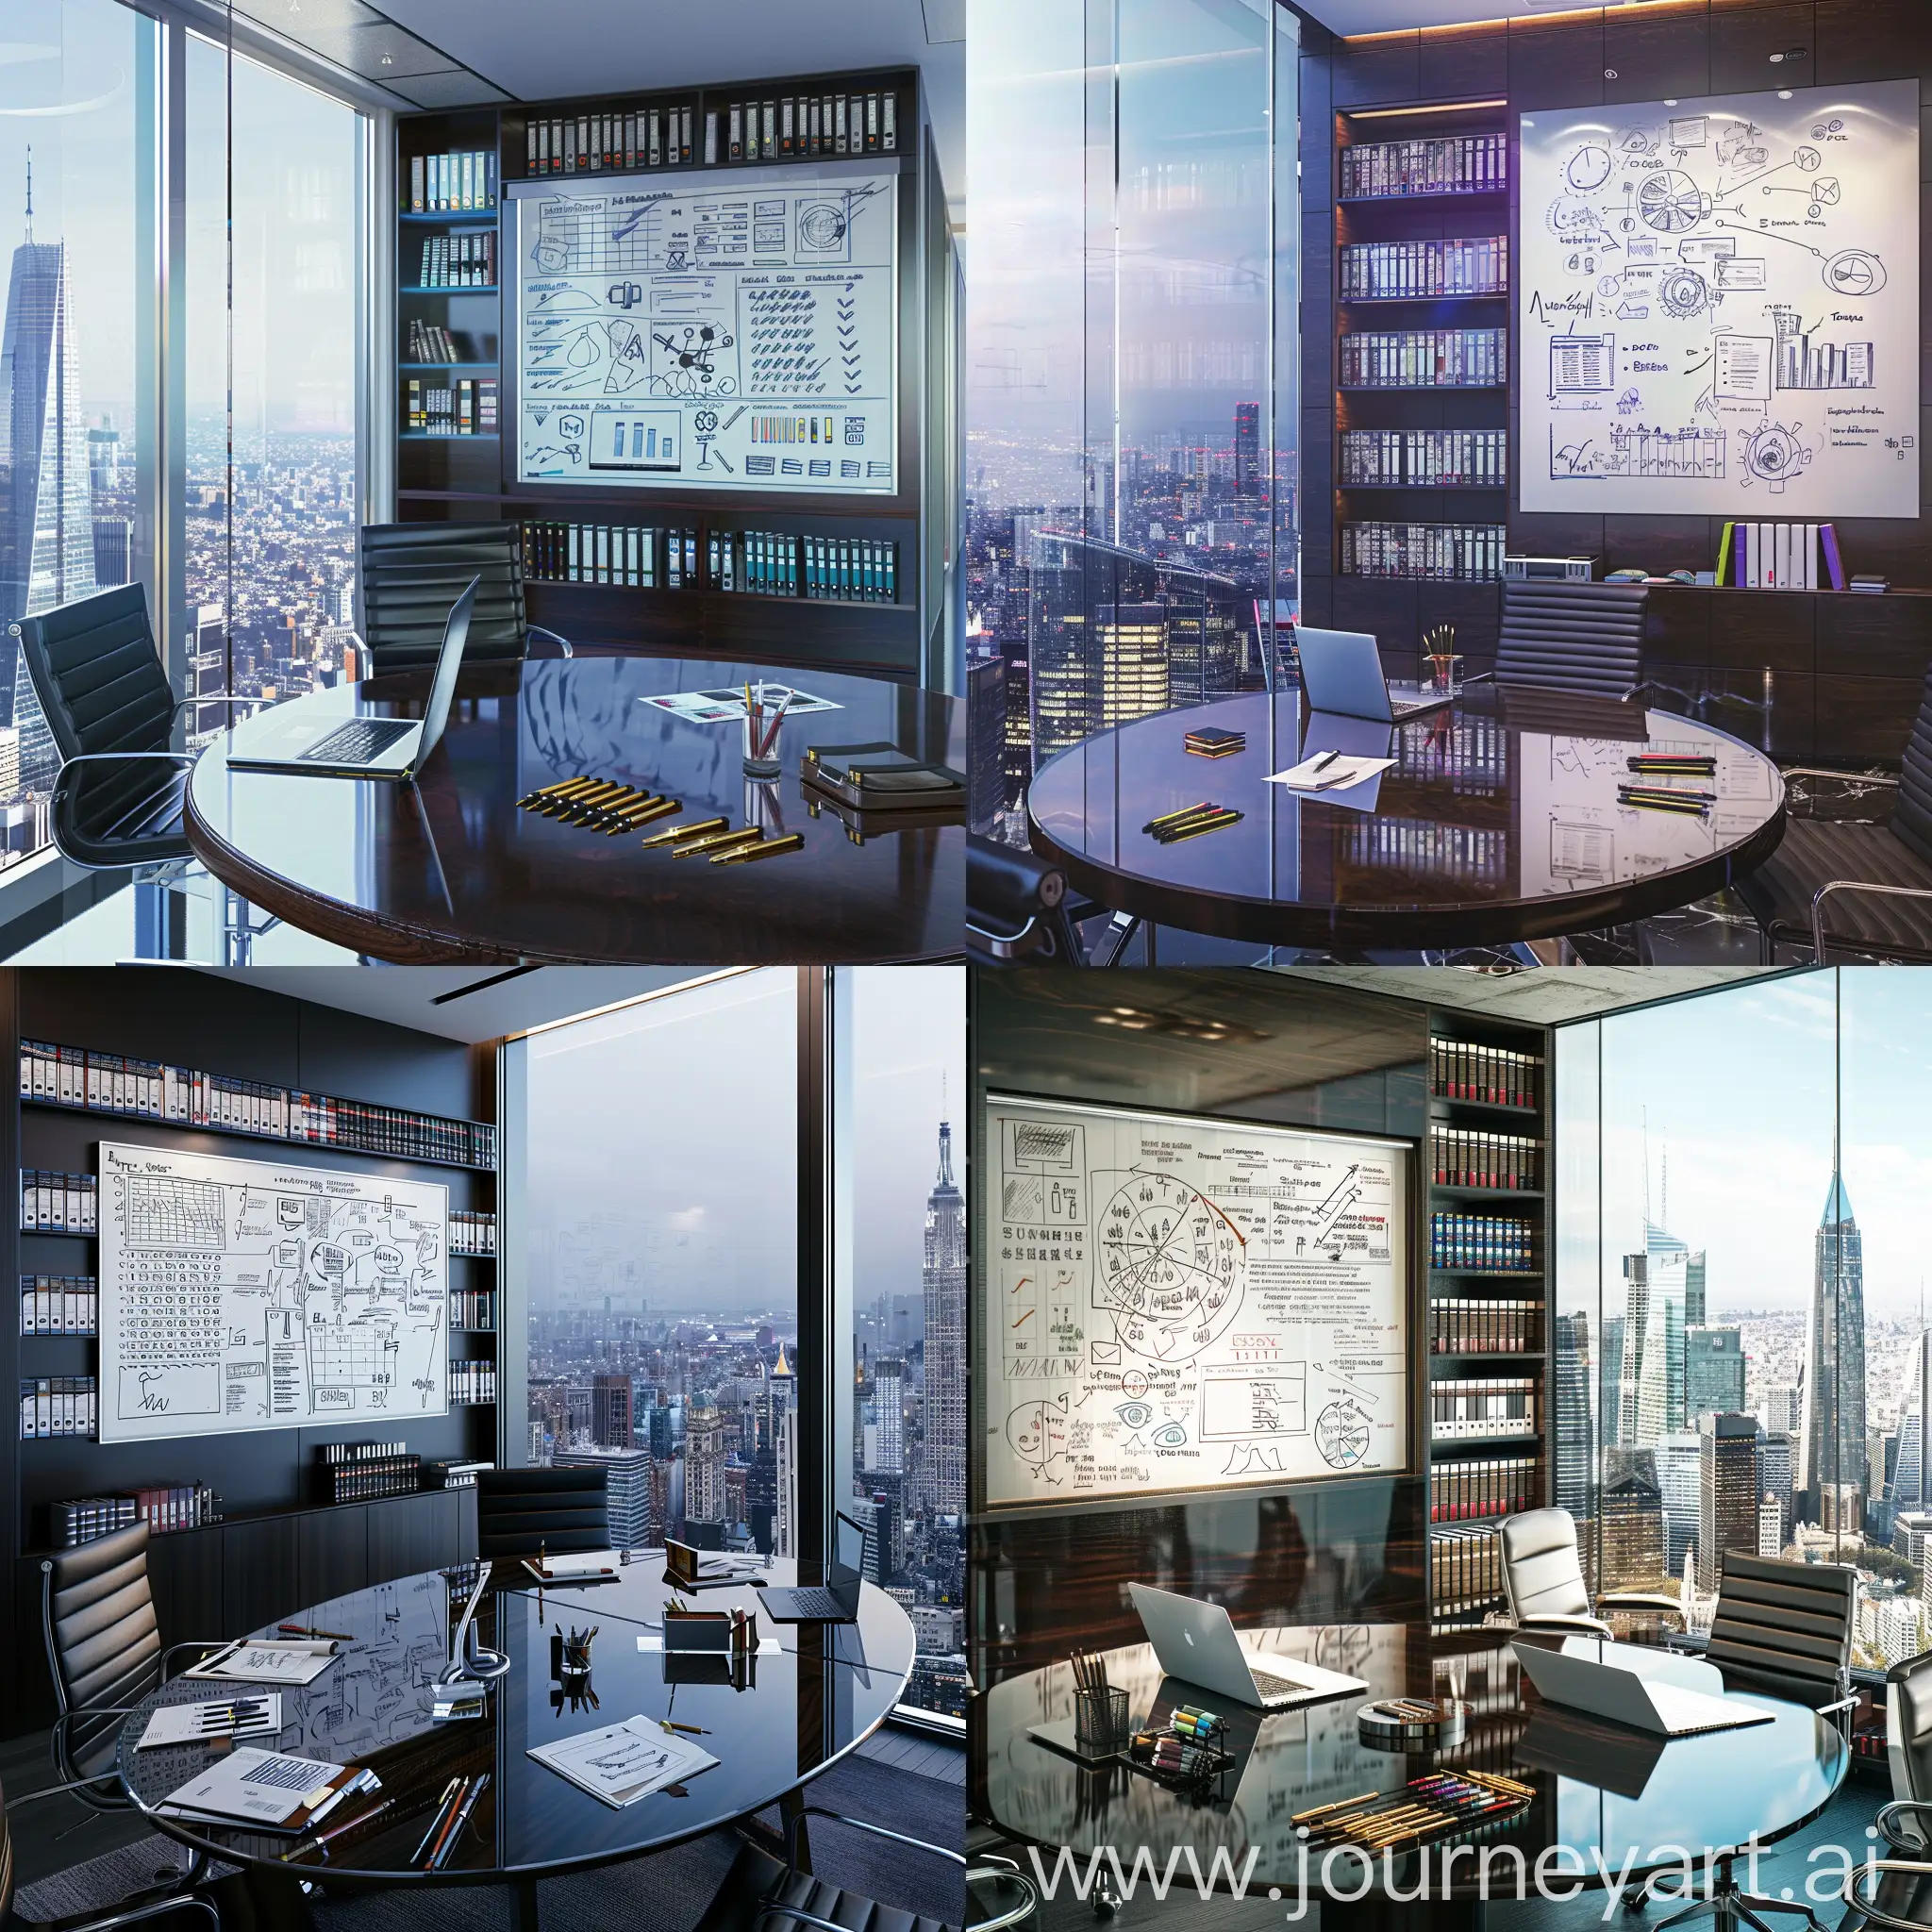 An elegant glass office at the top of a skyscraper, with a panoramic view of the city below. Inside the office, there is a polished dark wood desk, with a modern laptop and a set of luxury pens. On the wall behind the desk, there is a large whiteboard with various business strategies and complex charts drawn on it. Next to the board, there is a bookshelf full of books on business and economics. In the center of the office, there is a large round table with comfortable chairs around it, ready for a business meeting. This scene conveys a sense of professionalism, sophistication, and success